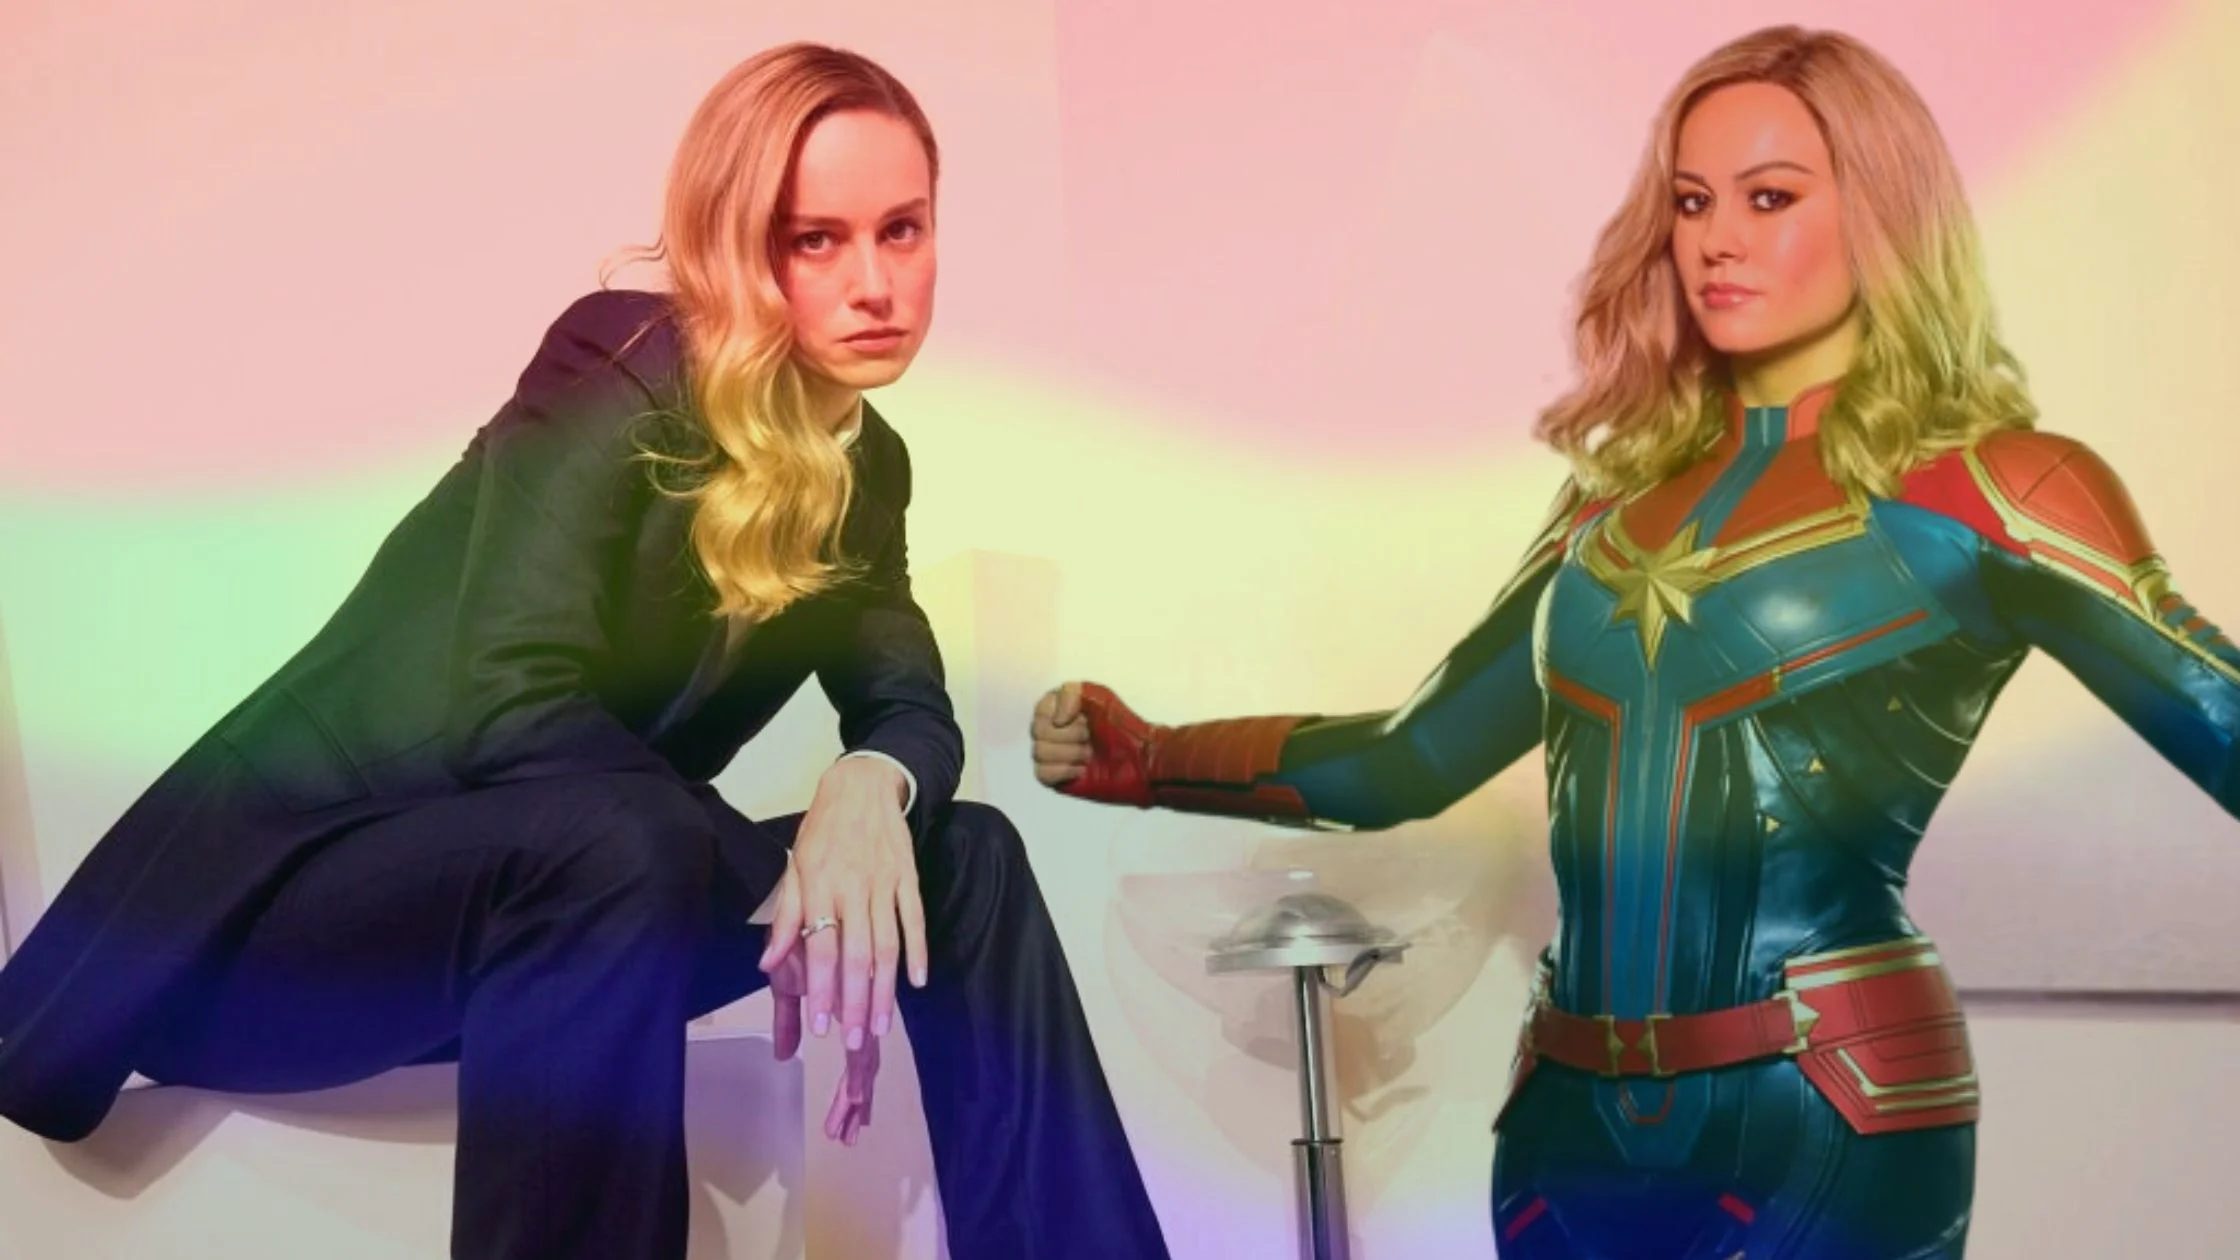 Is Brie Larson A lesbian Is Her New Video A Hint For Her Sexuality